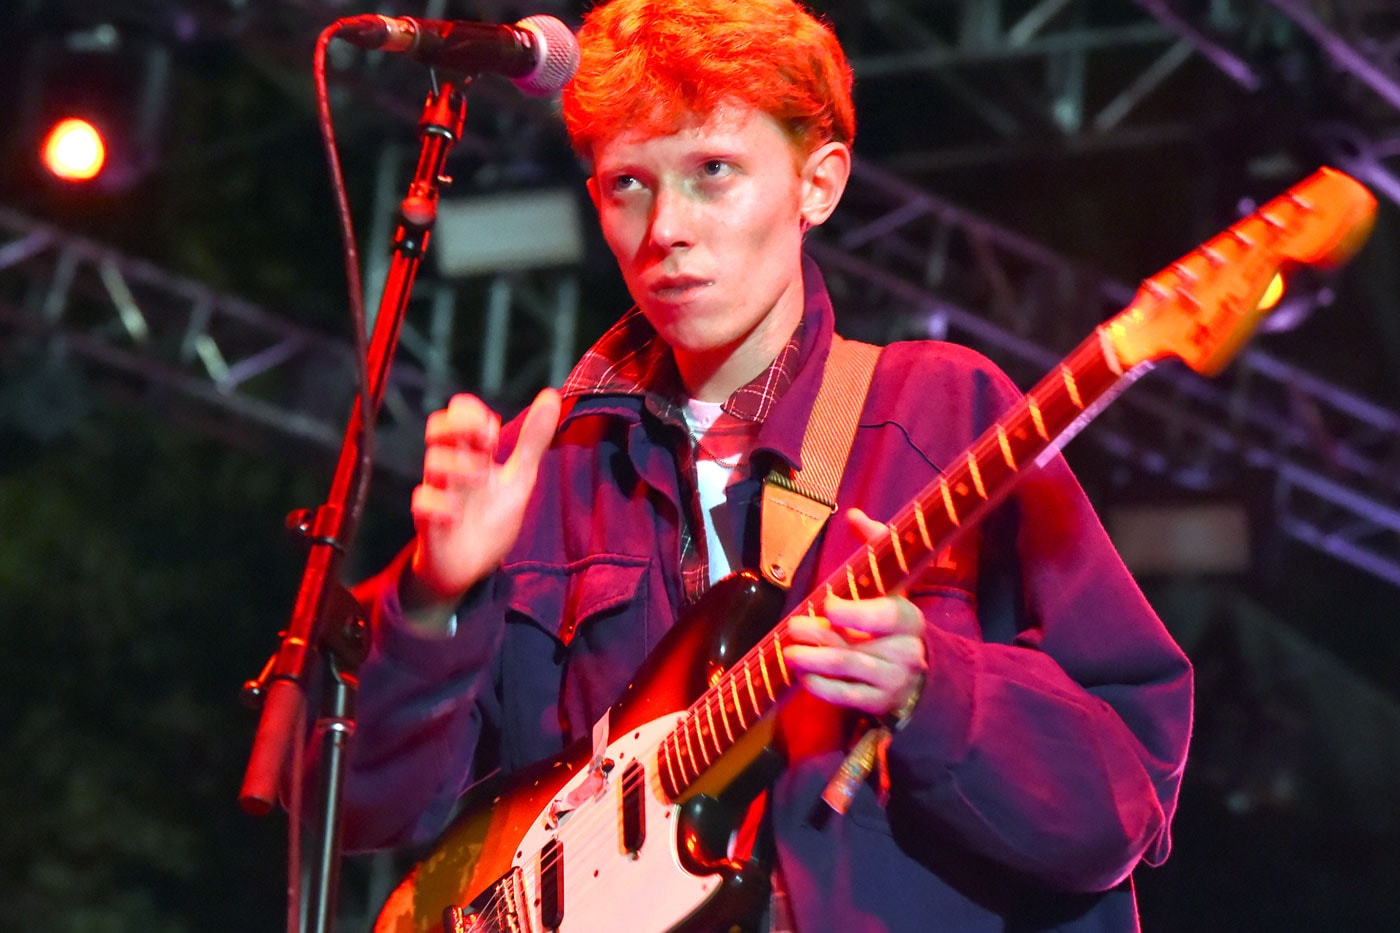 King Krule Performs a New Song at Beach Goth Festival New Album Archy Marshall